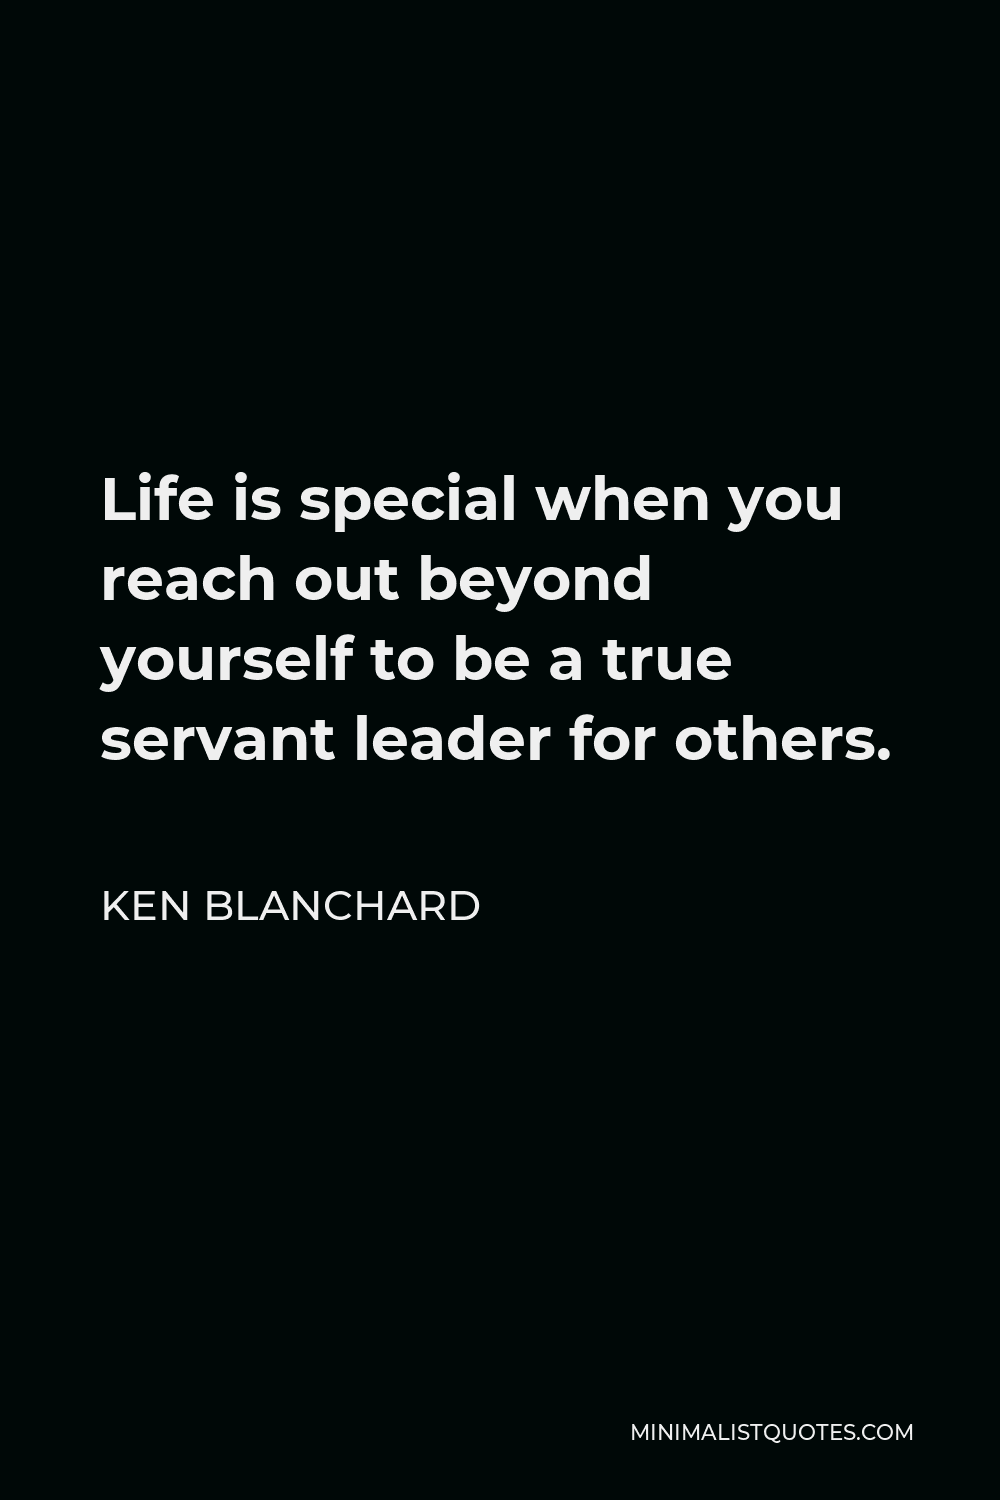 Ken Blanchard Quote - Life is special when you reach out beyond yourself to be a true servant leader for others.